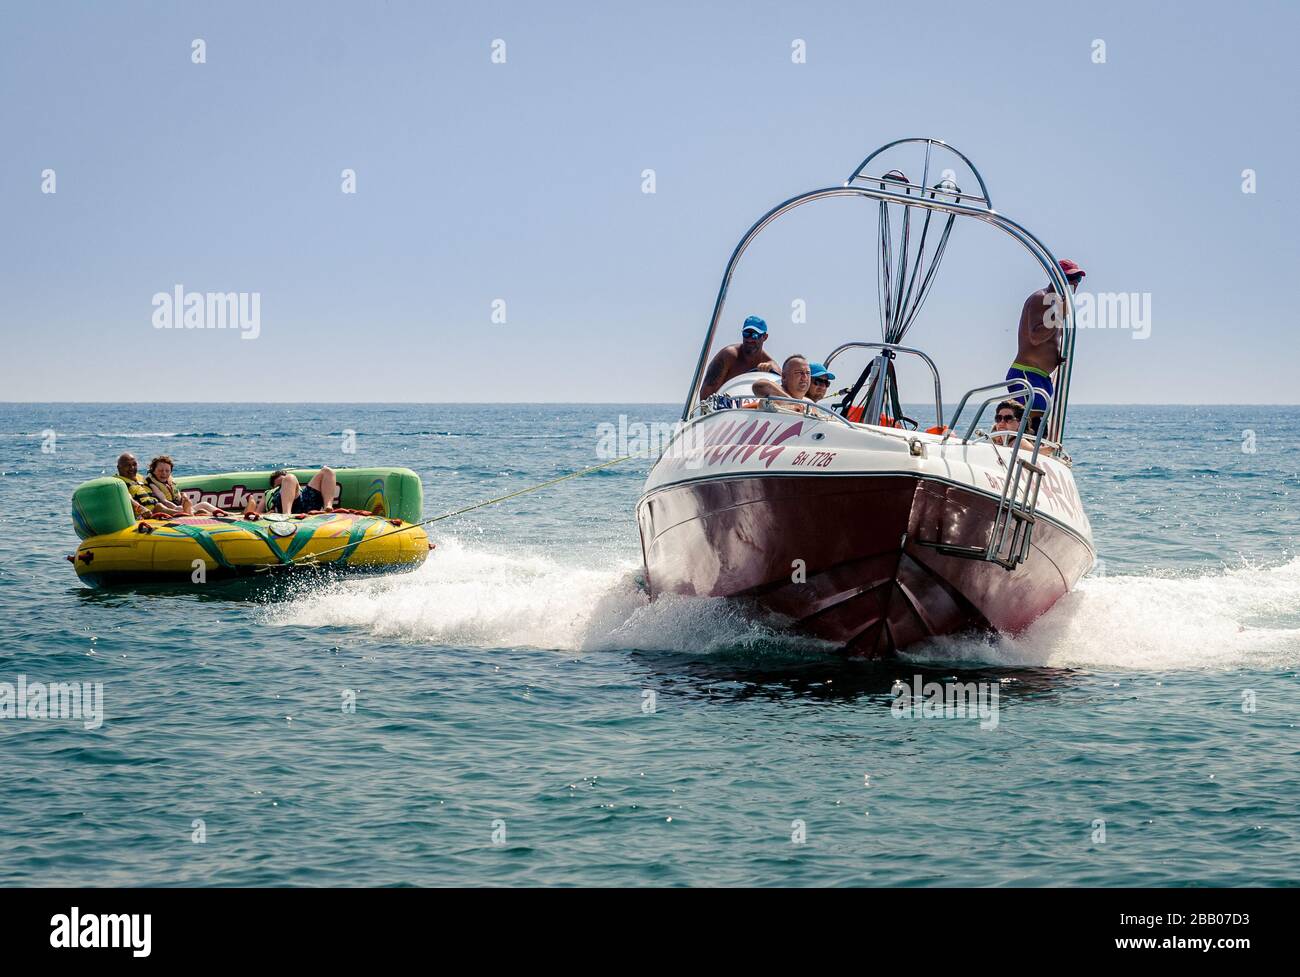 Exciting Water tubing with Power boat on the black sea towing holiday thrill seekers on a large inflatable rubber ring, long shot, Varna Bulgaria Stock Photo